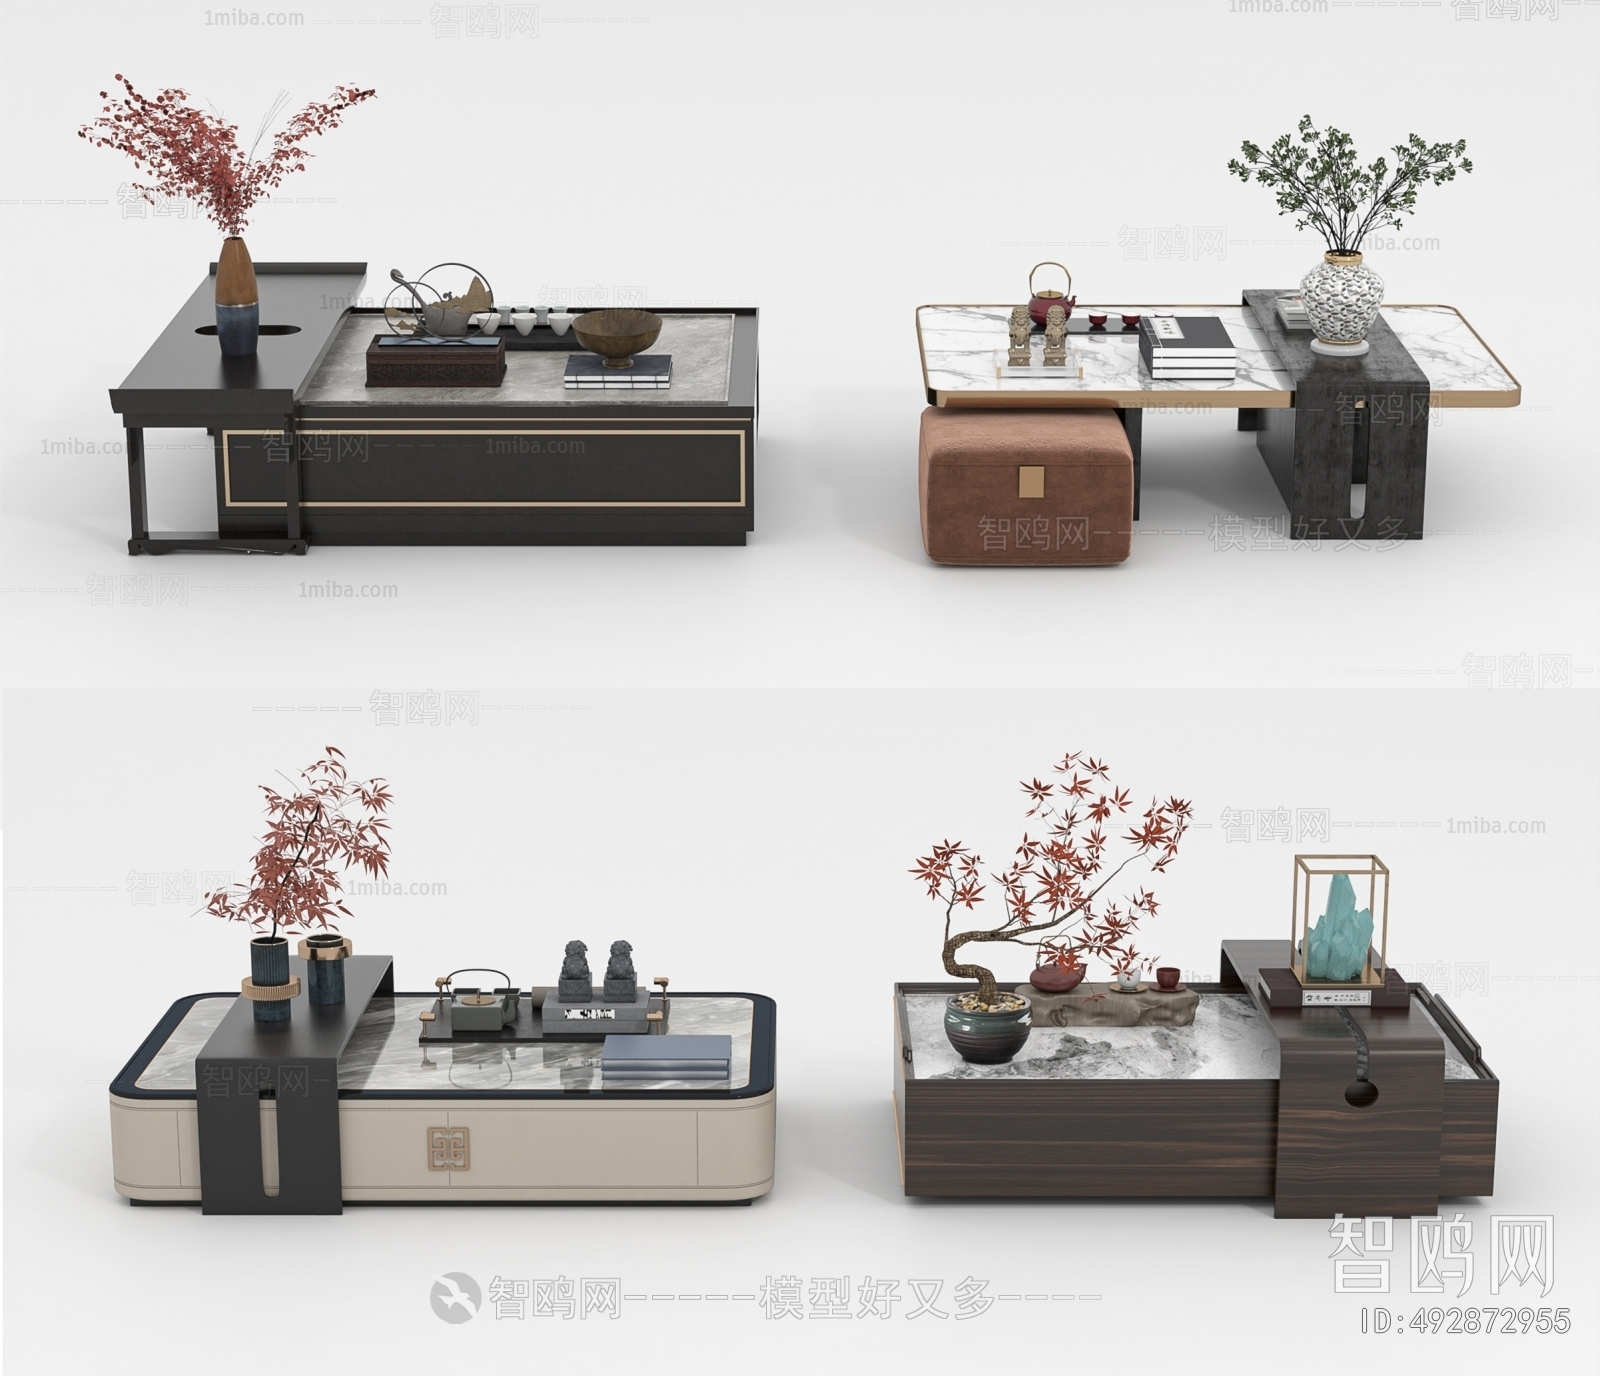 New Chinese Style Coffee Table